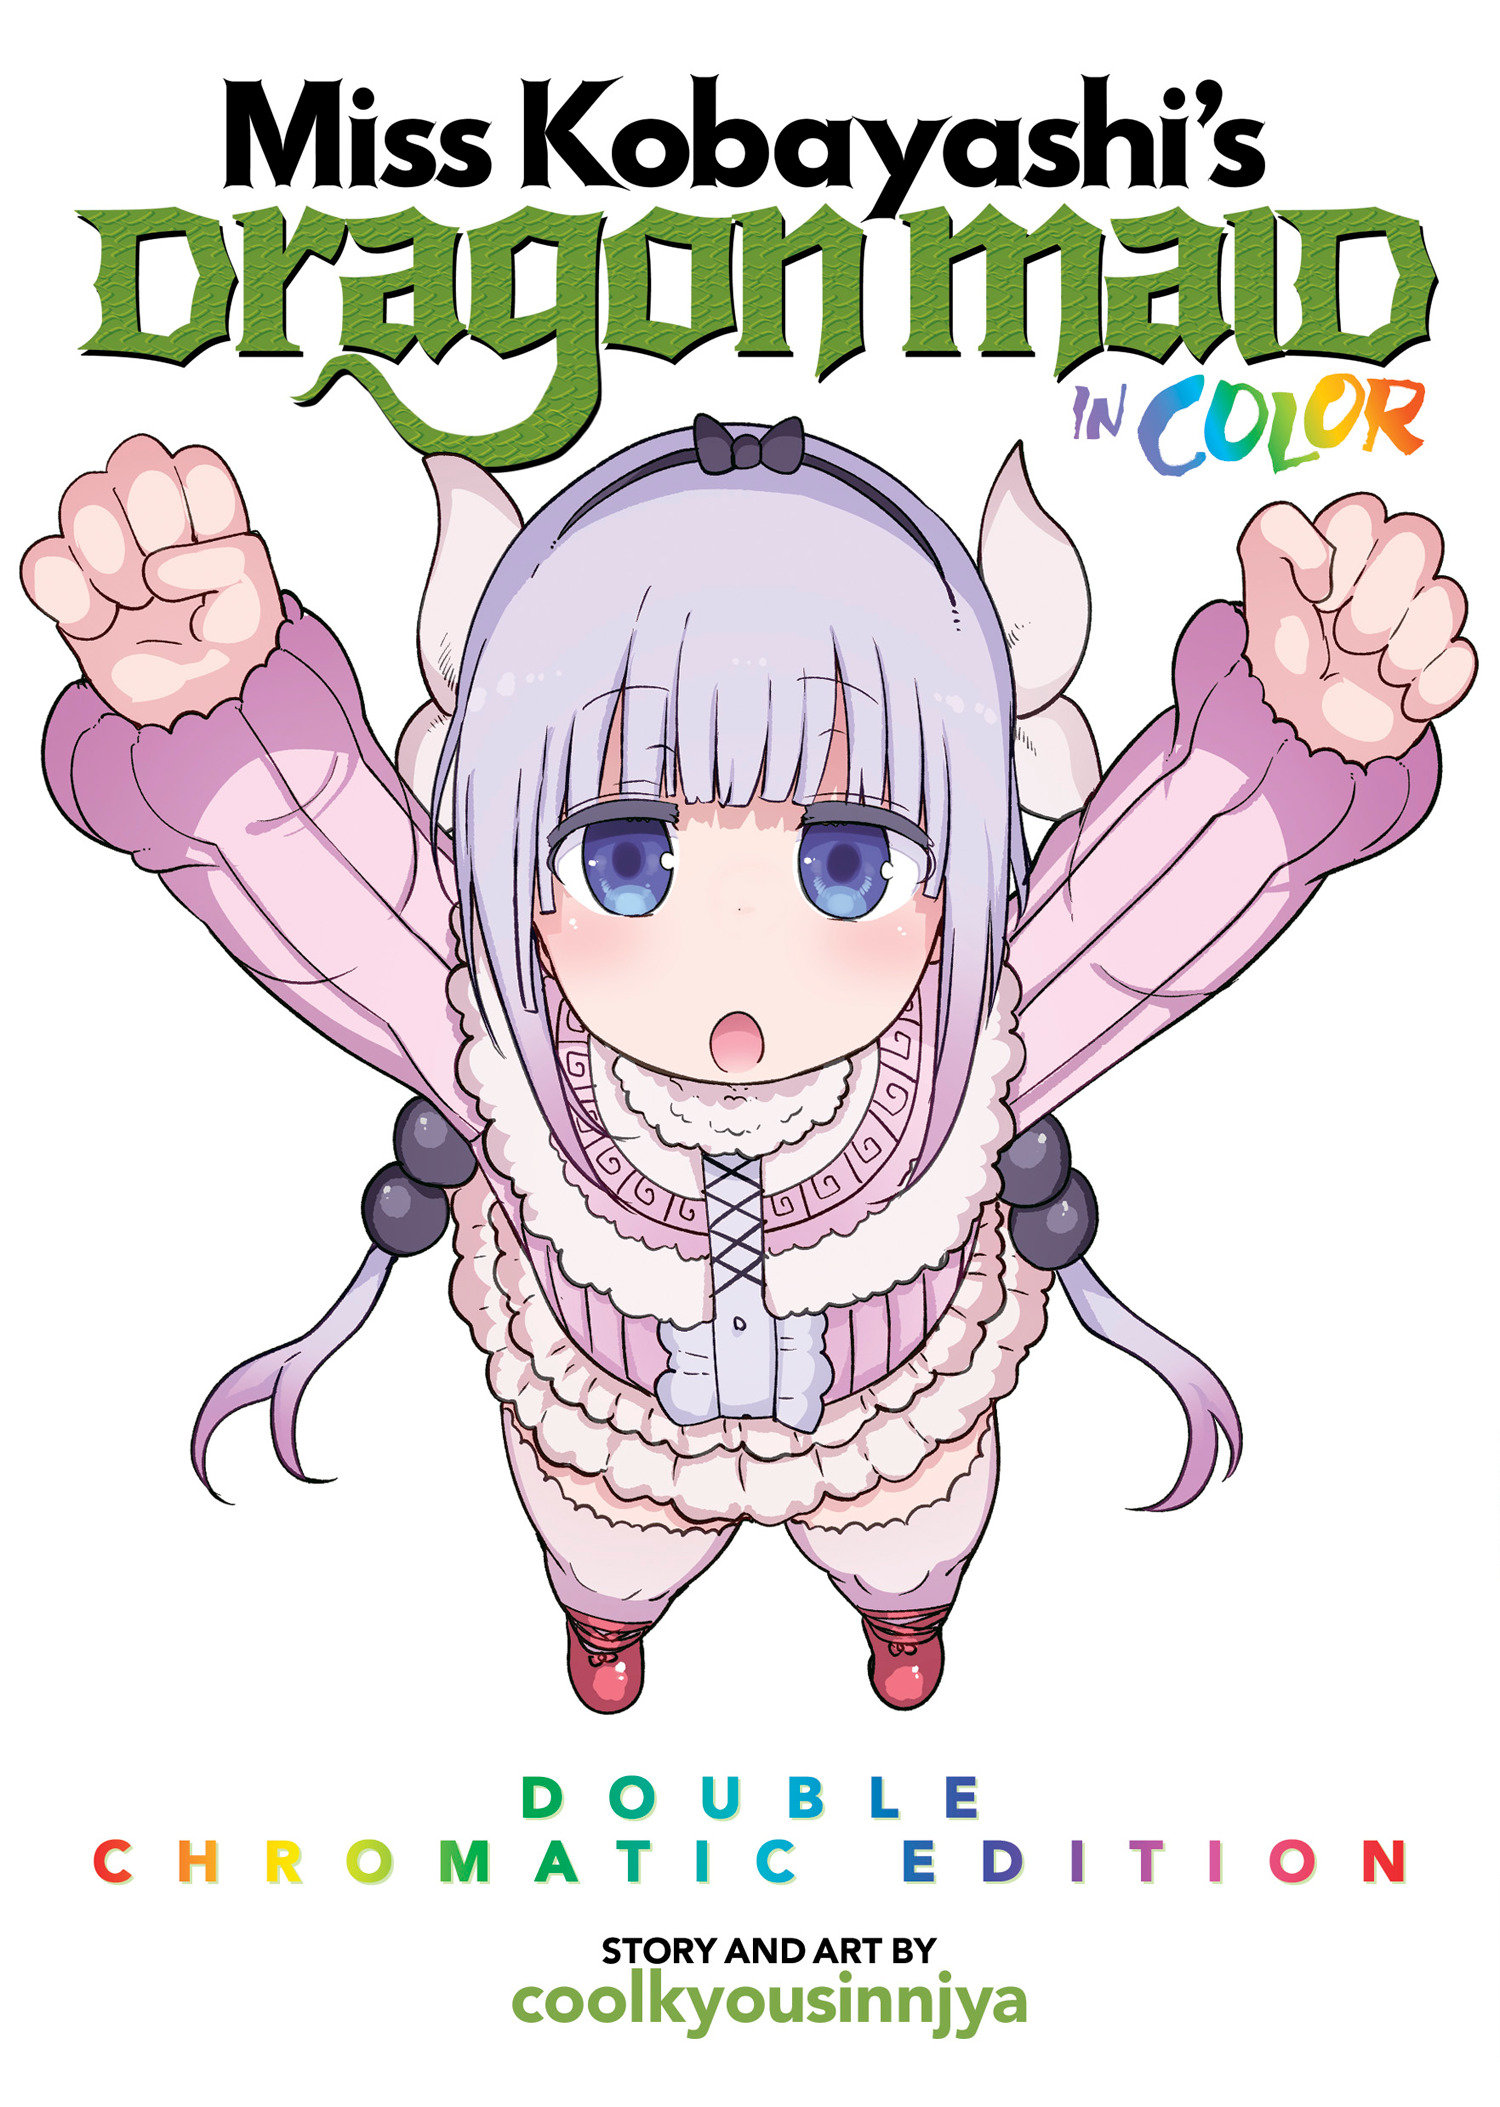 Miss Kobayashi's Dragon Maid In Color! - Double-Chromatic Edition Volume 2